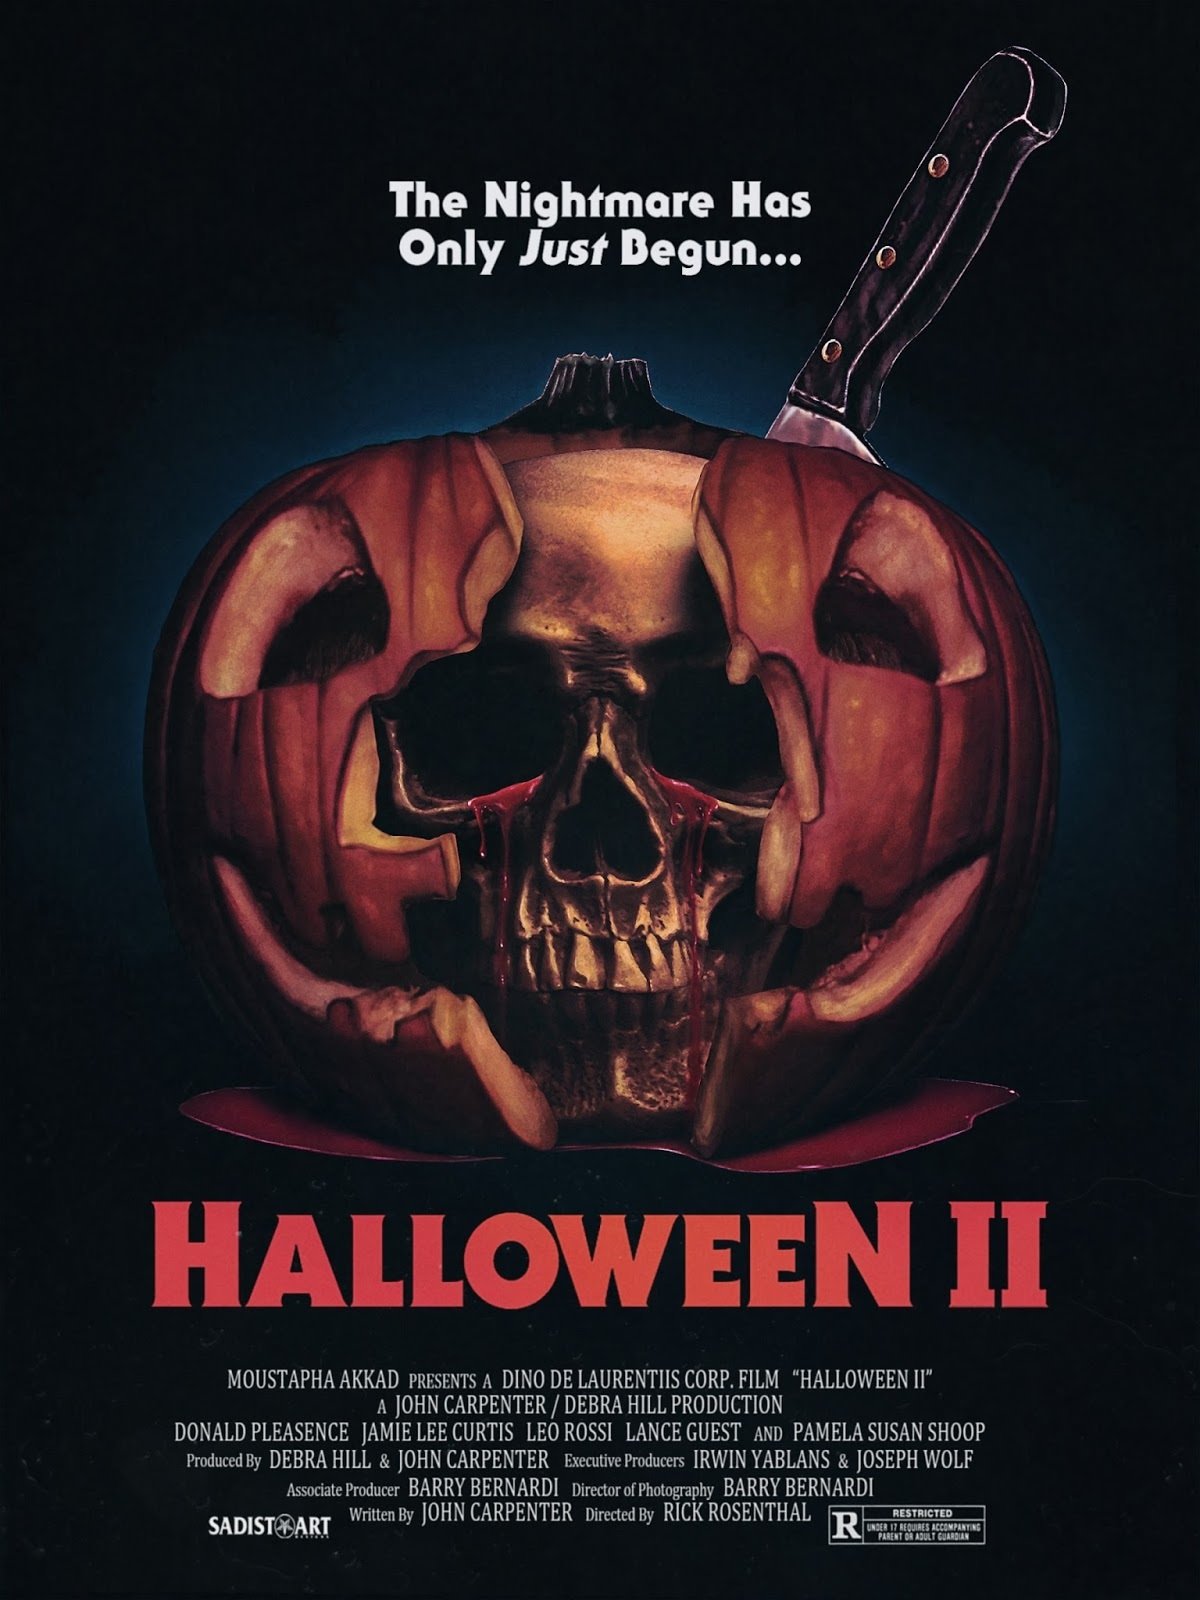 Halloween II: the movie poster dated 1981